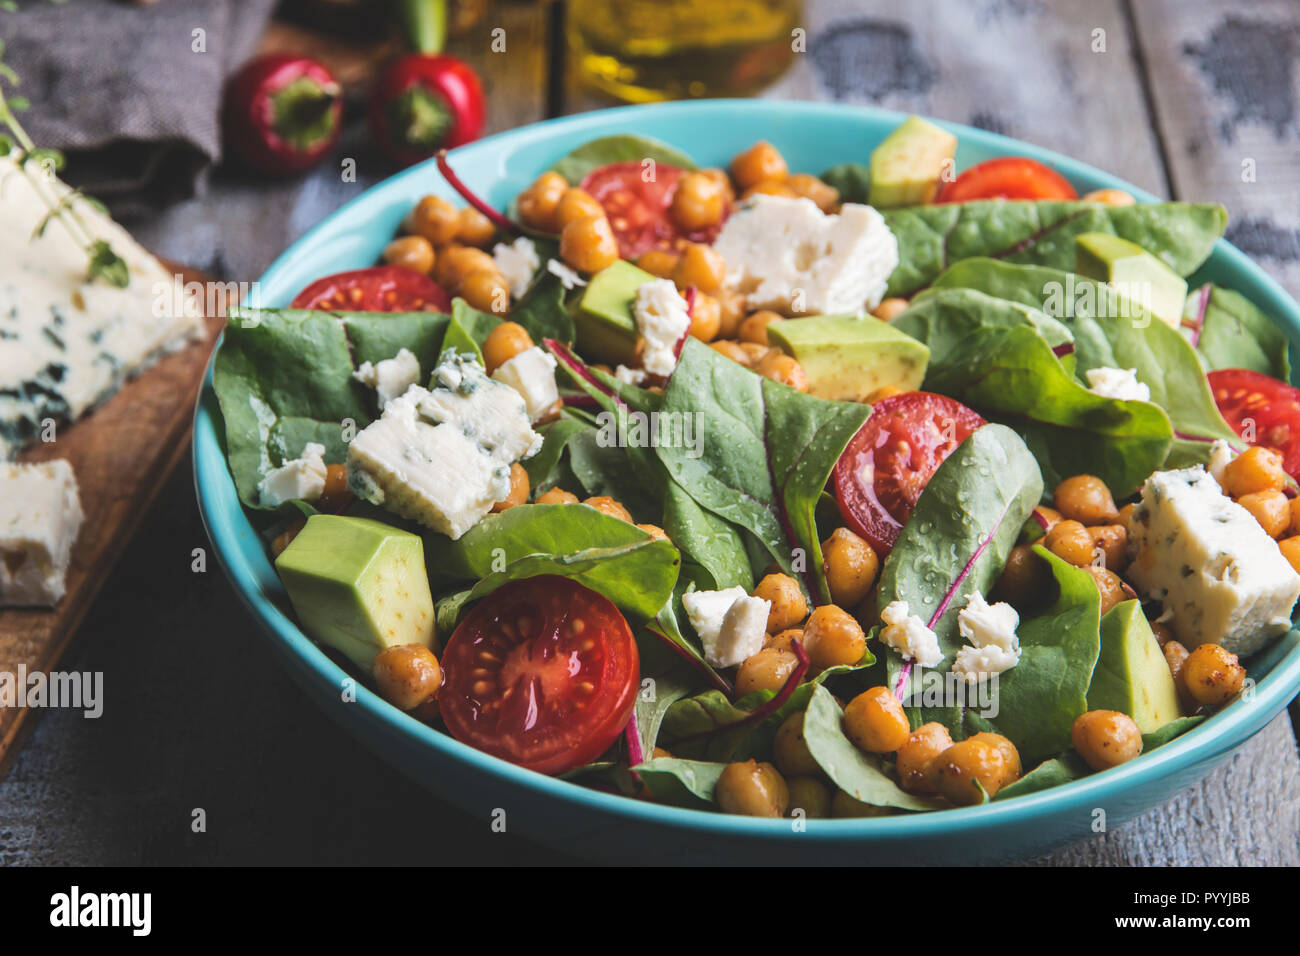 Healthy vegan salad with avocado ,beet leaves ,chickpea, broccoli ,tomato,blue cheese Stock Photo